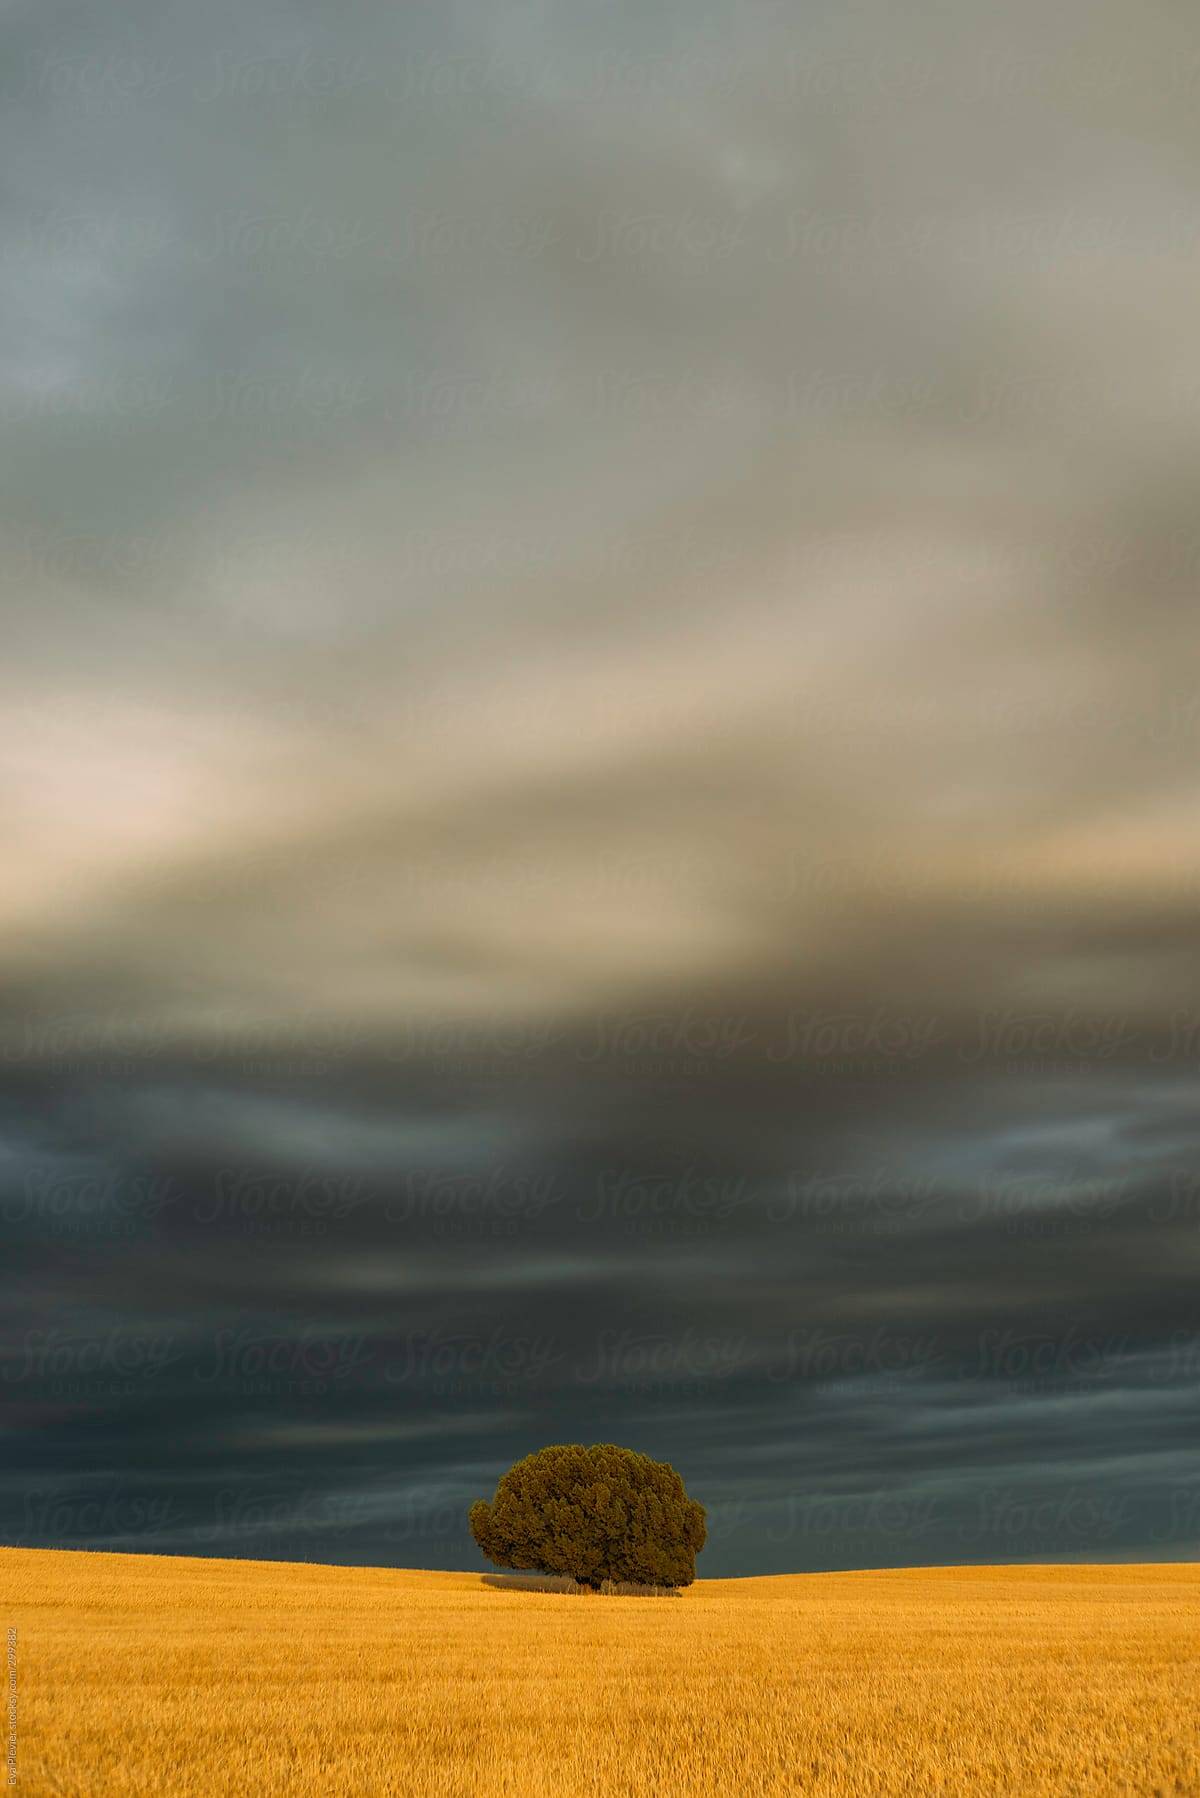 Lonely tree in a grain field with dark clouds.